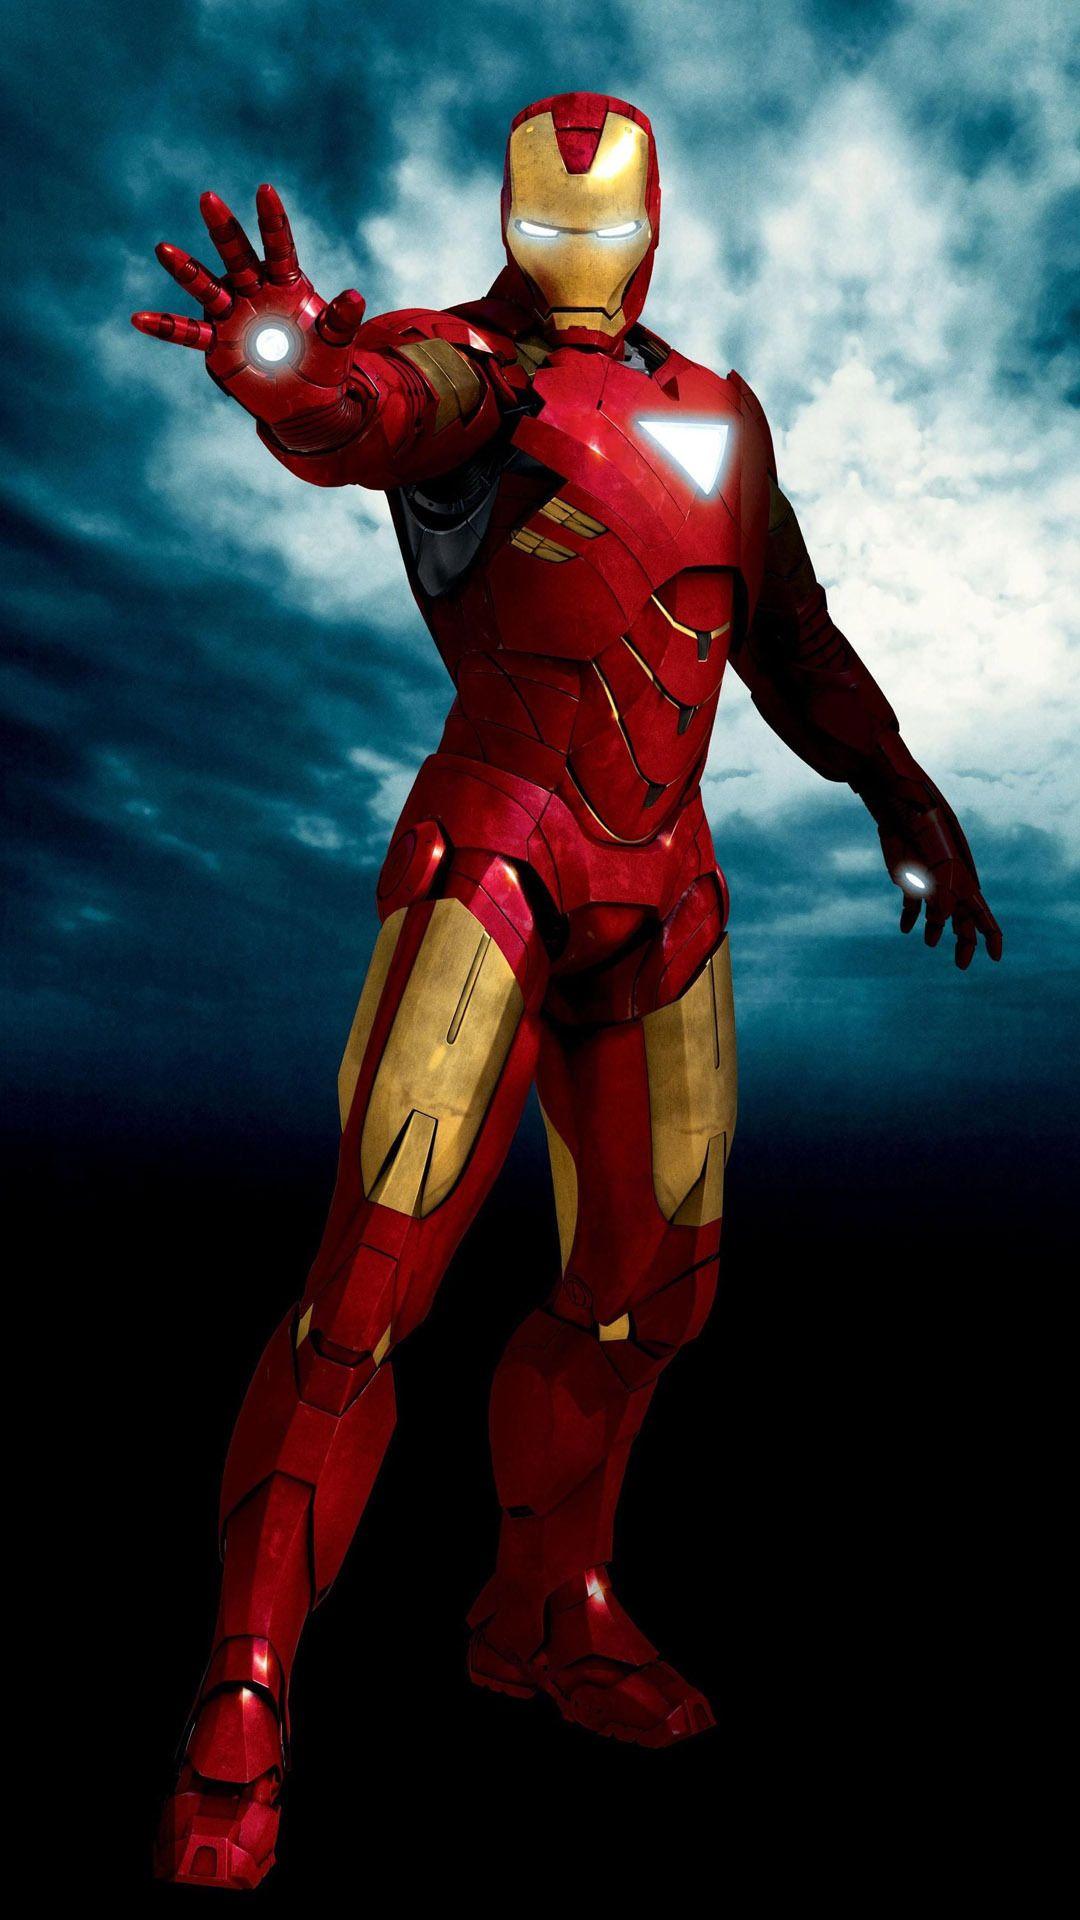 Awesome Iron Man Fond D'écran Iphone Mobile Android 302